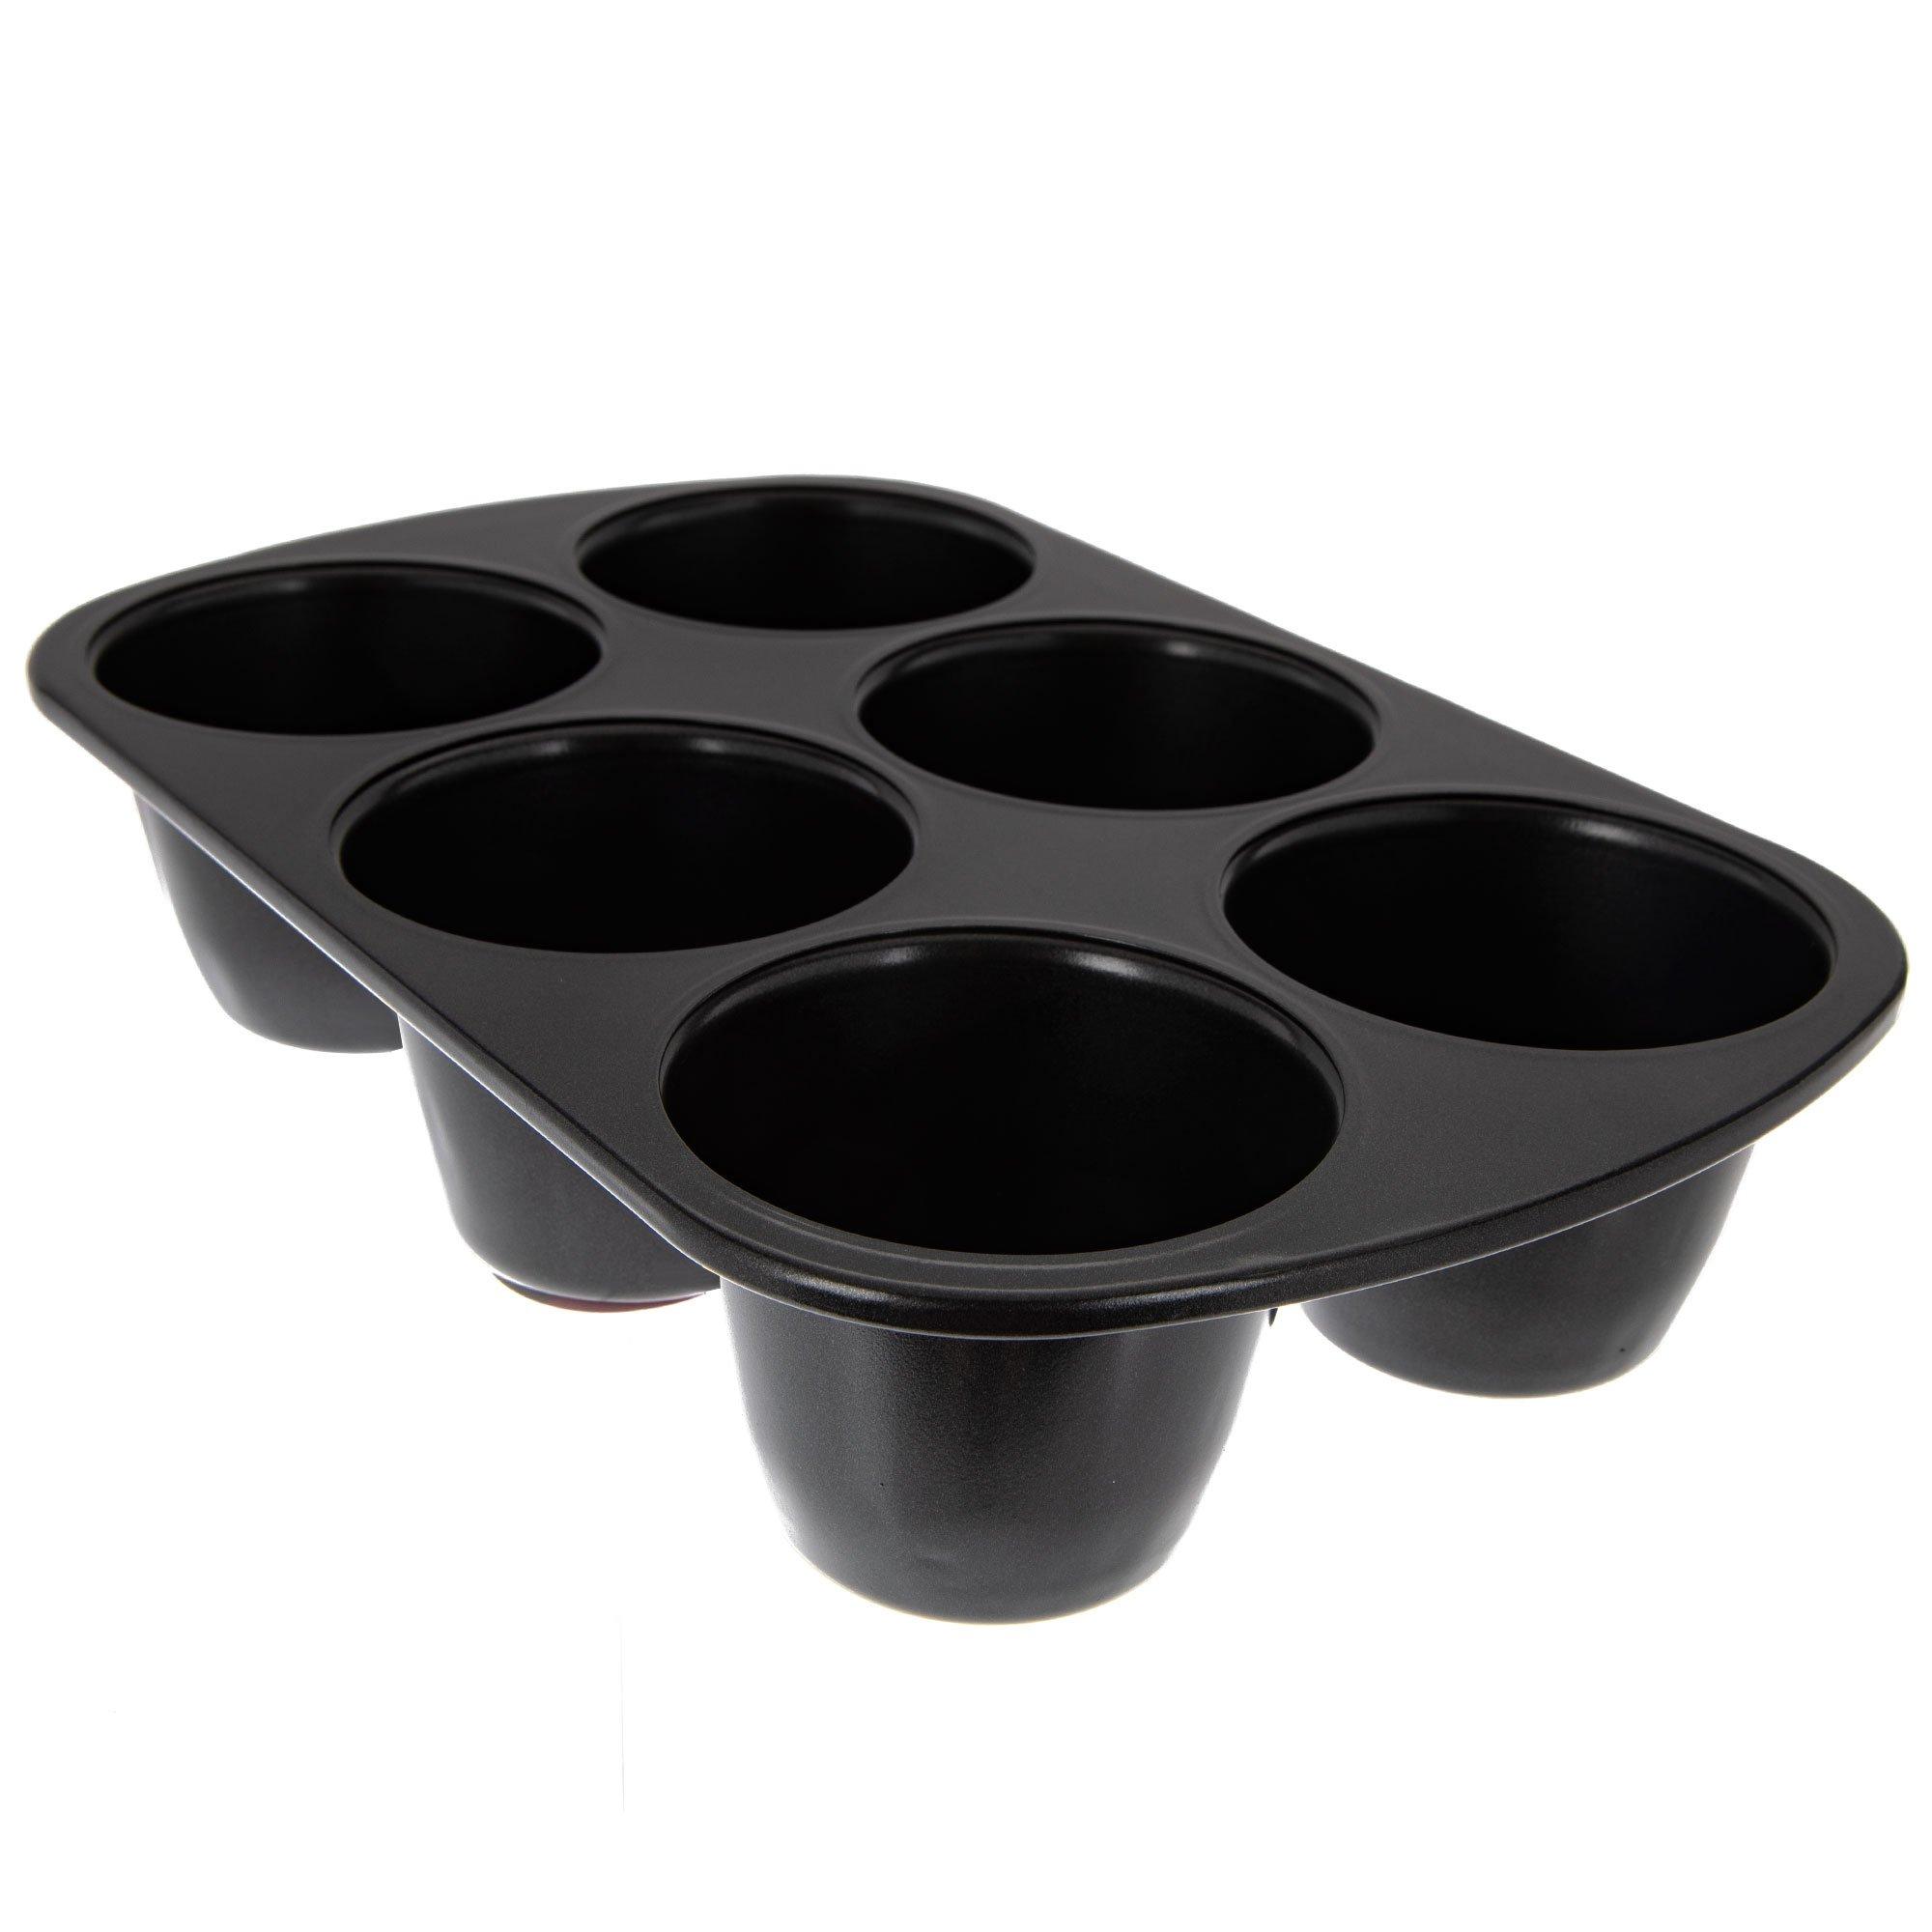 Muffin Pan and Lid - King Arthur Baking Company